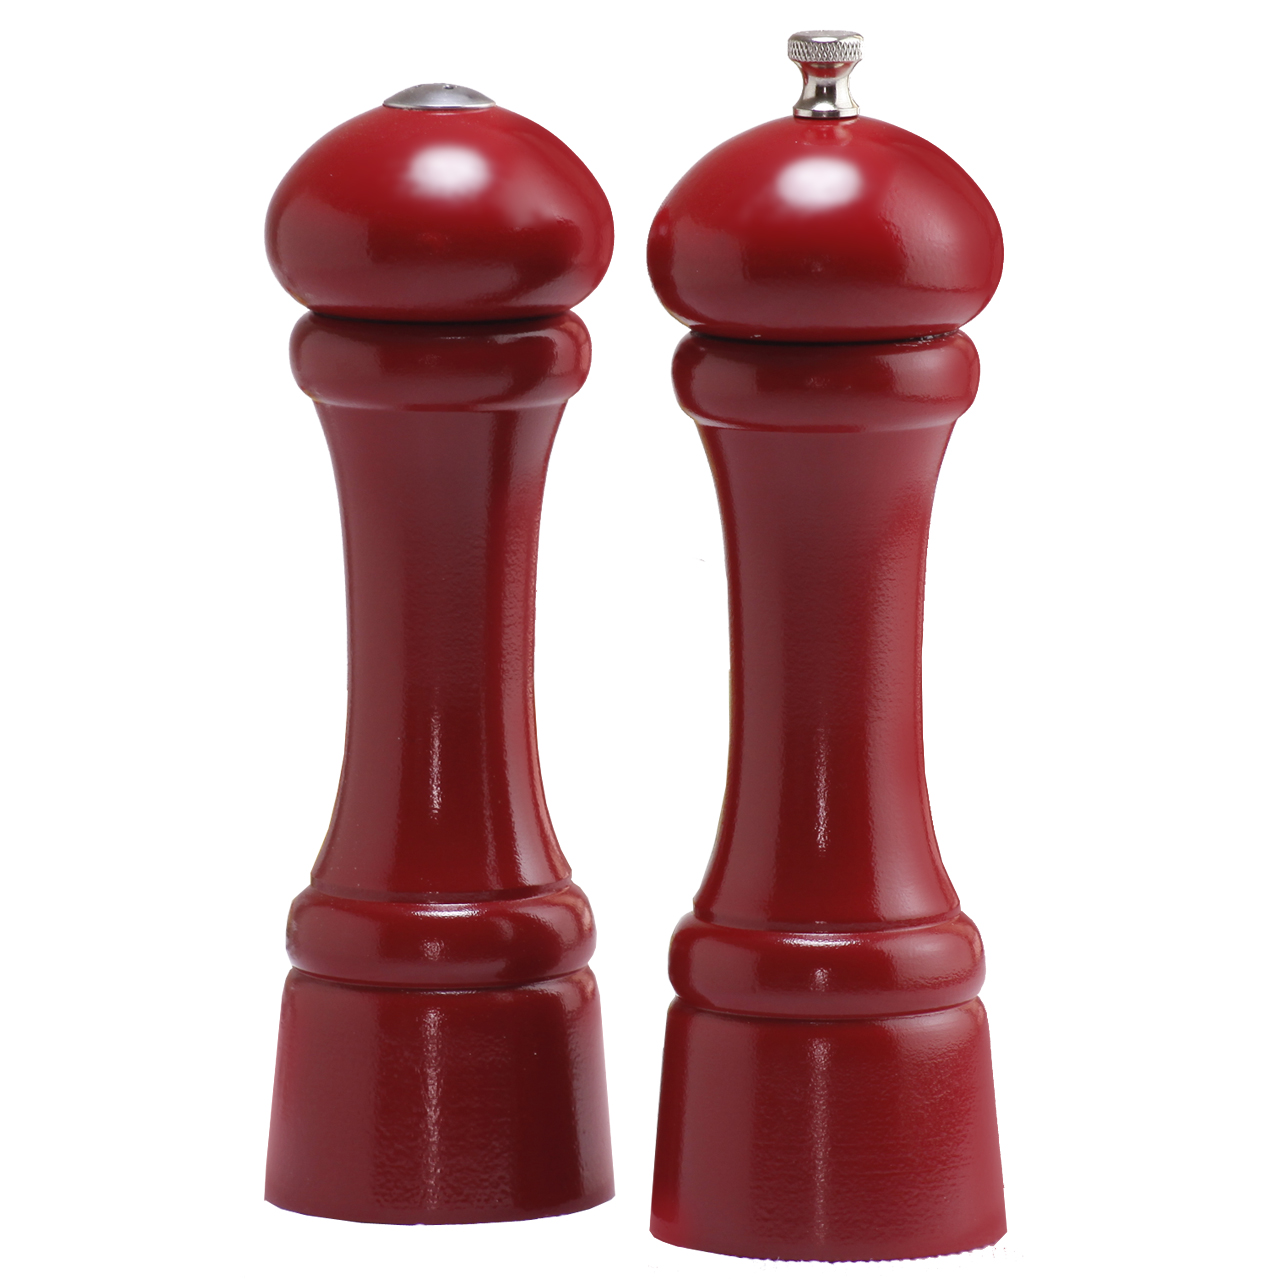 08600 8 In. Candy Apple Red Pepper Mill And Salt Shaker Set